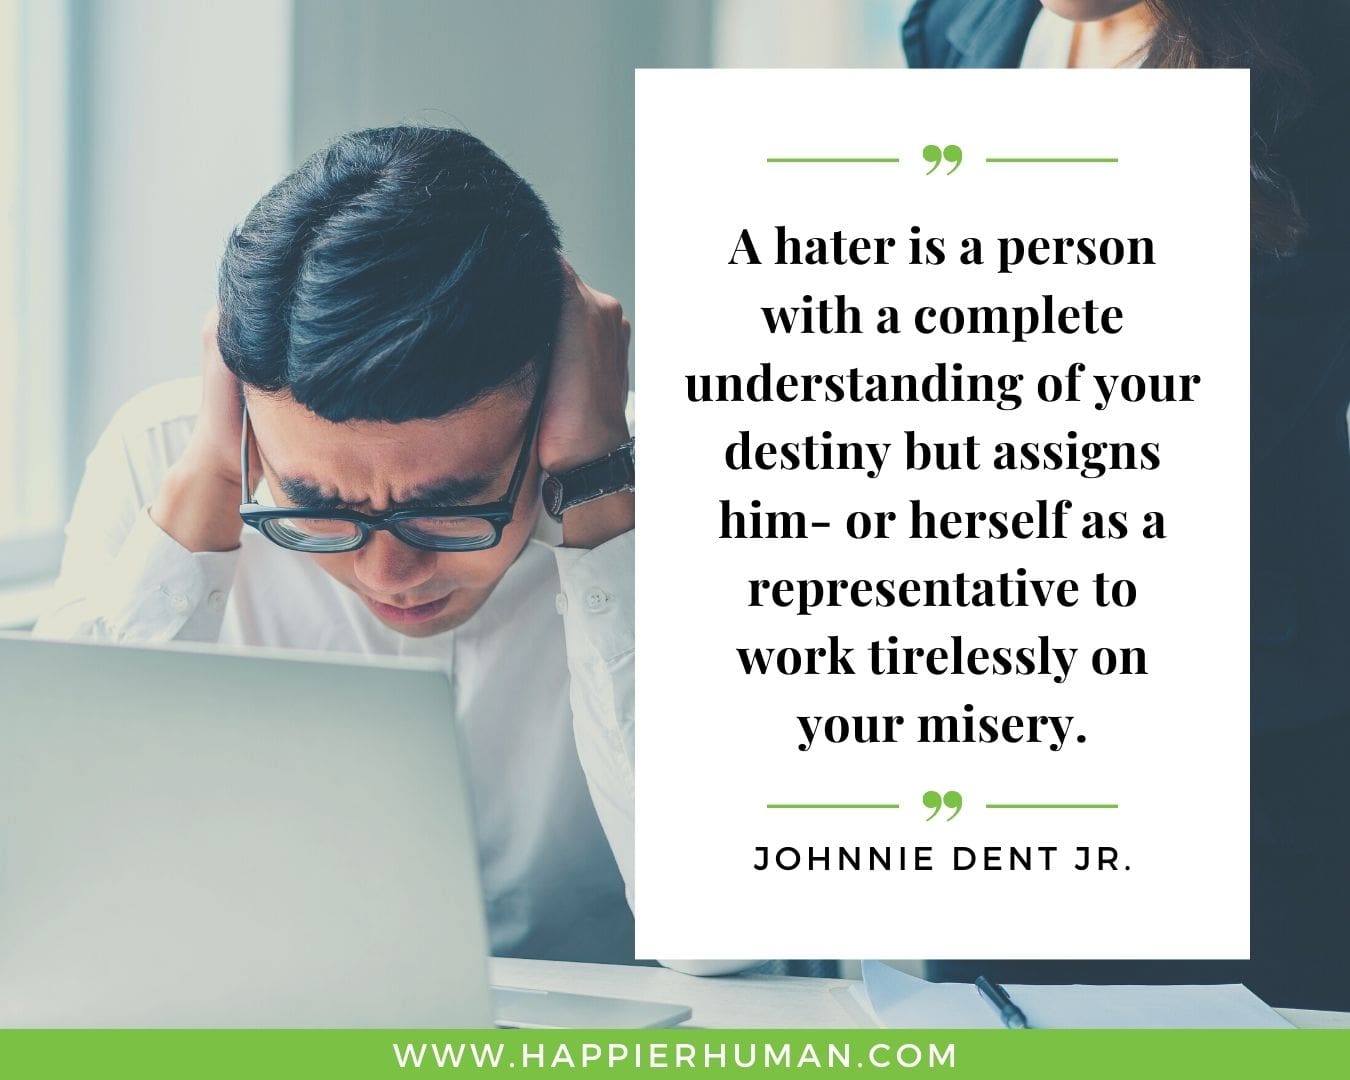 Haters Quotes - “A hater is a person with a complete understanding of your destiny but assigns him- or herself as a representative to work tirelessly on your misery.“- Johnnie Dent Jr.